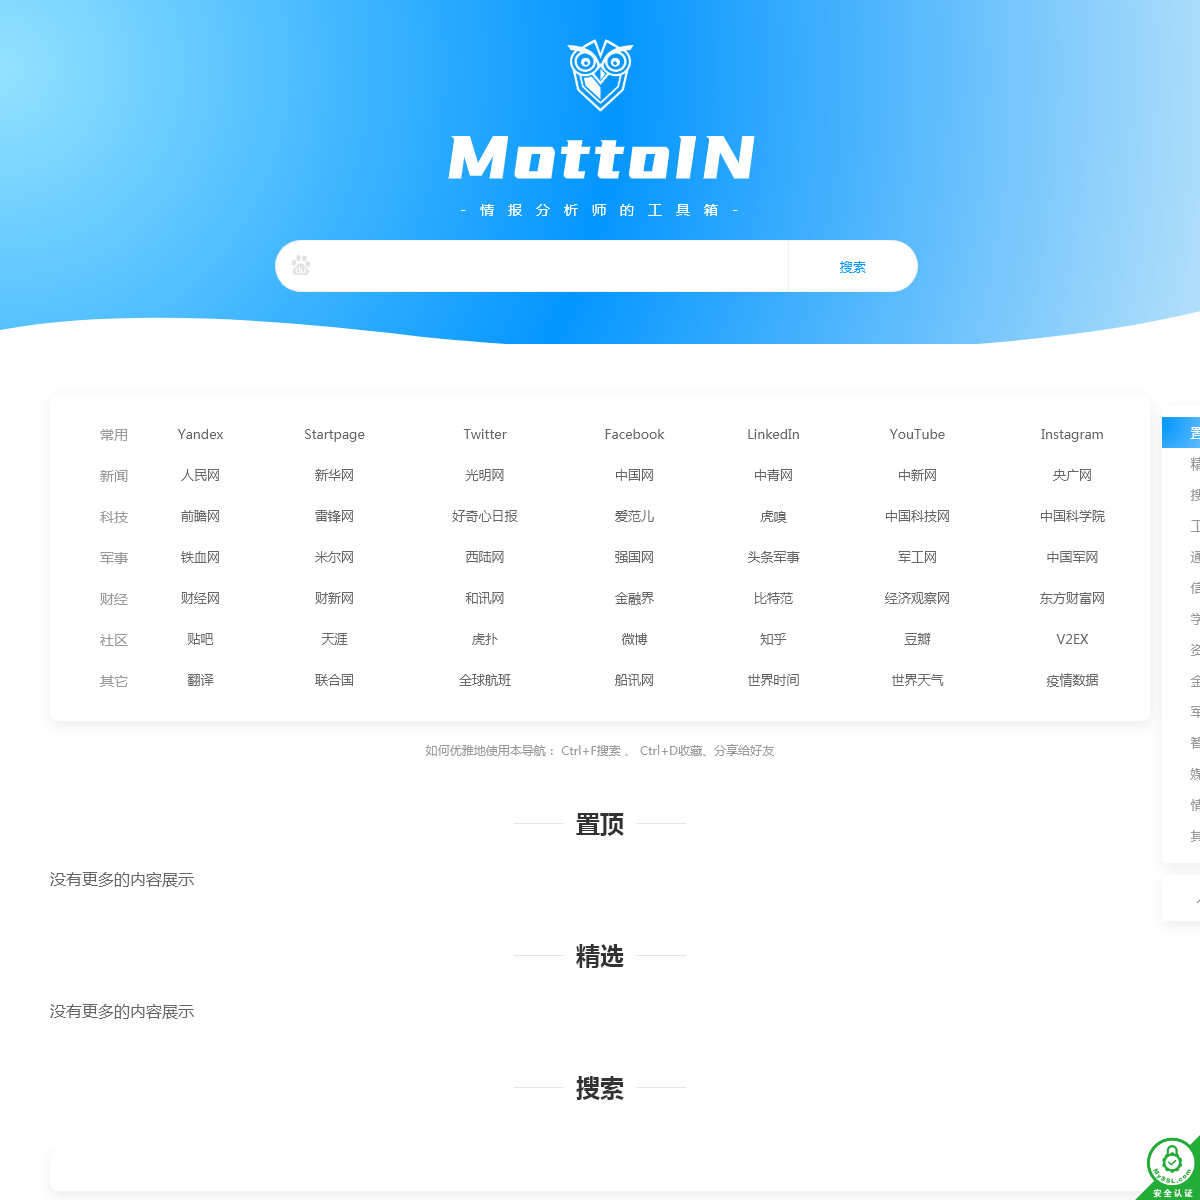 A complete backup of mottoin.com